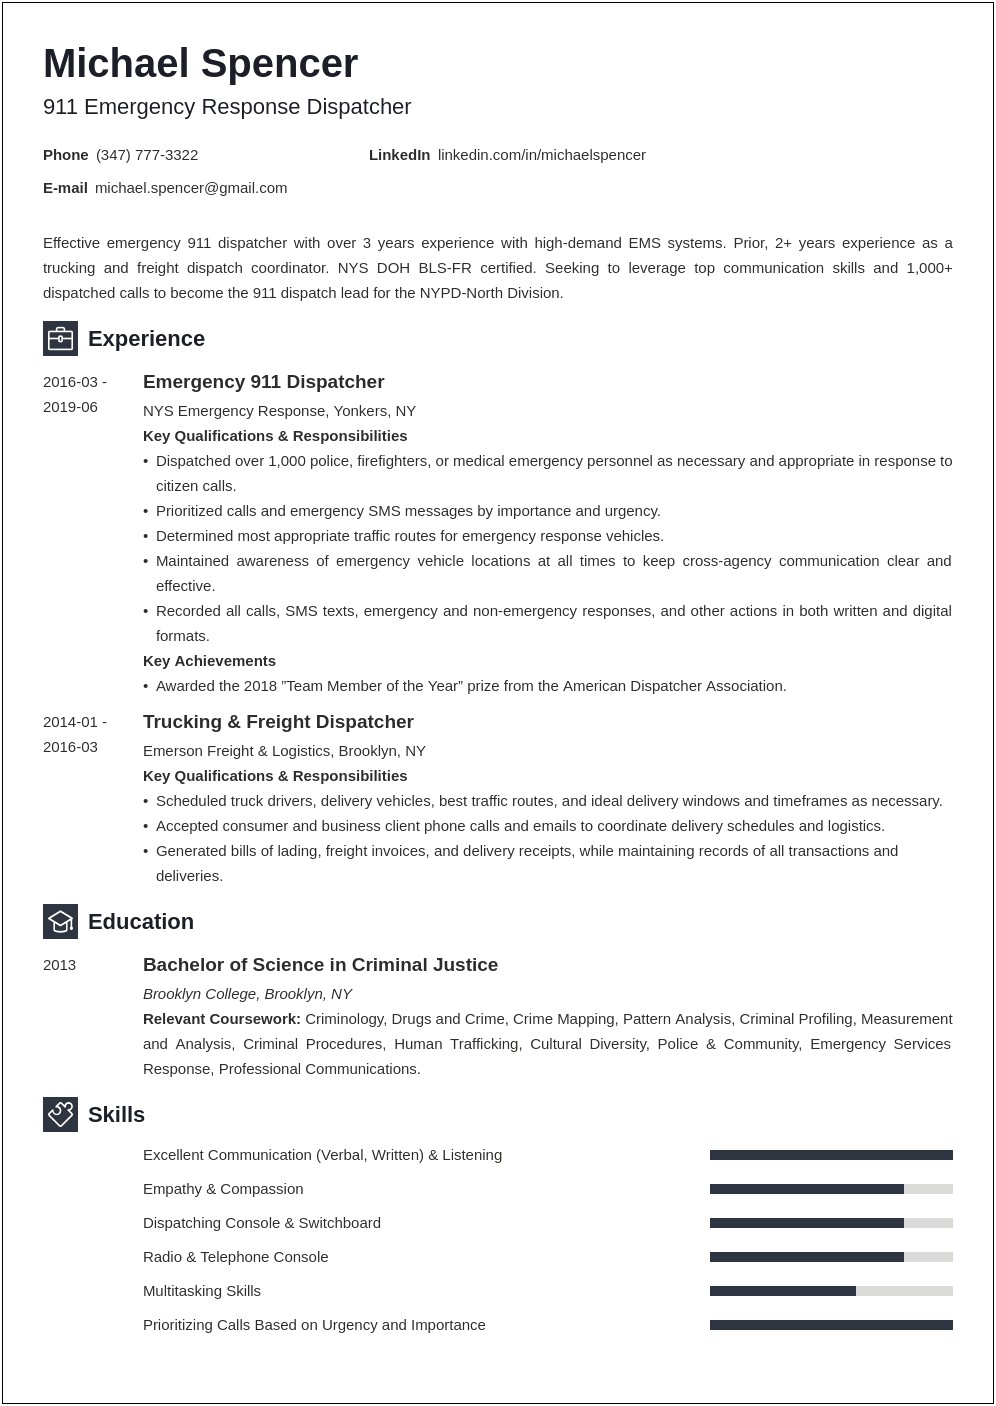 Resume Objective Examples For 911 Dispatcher